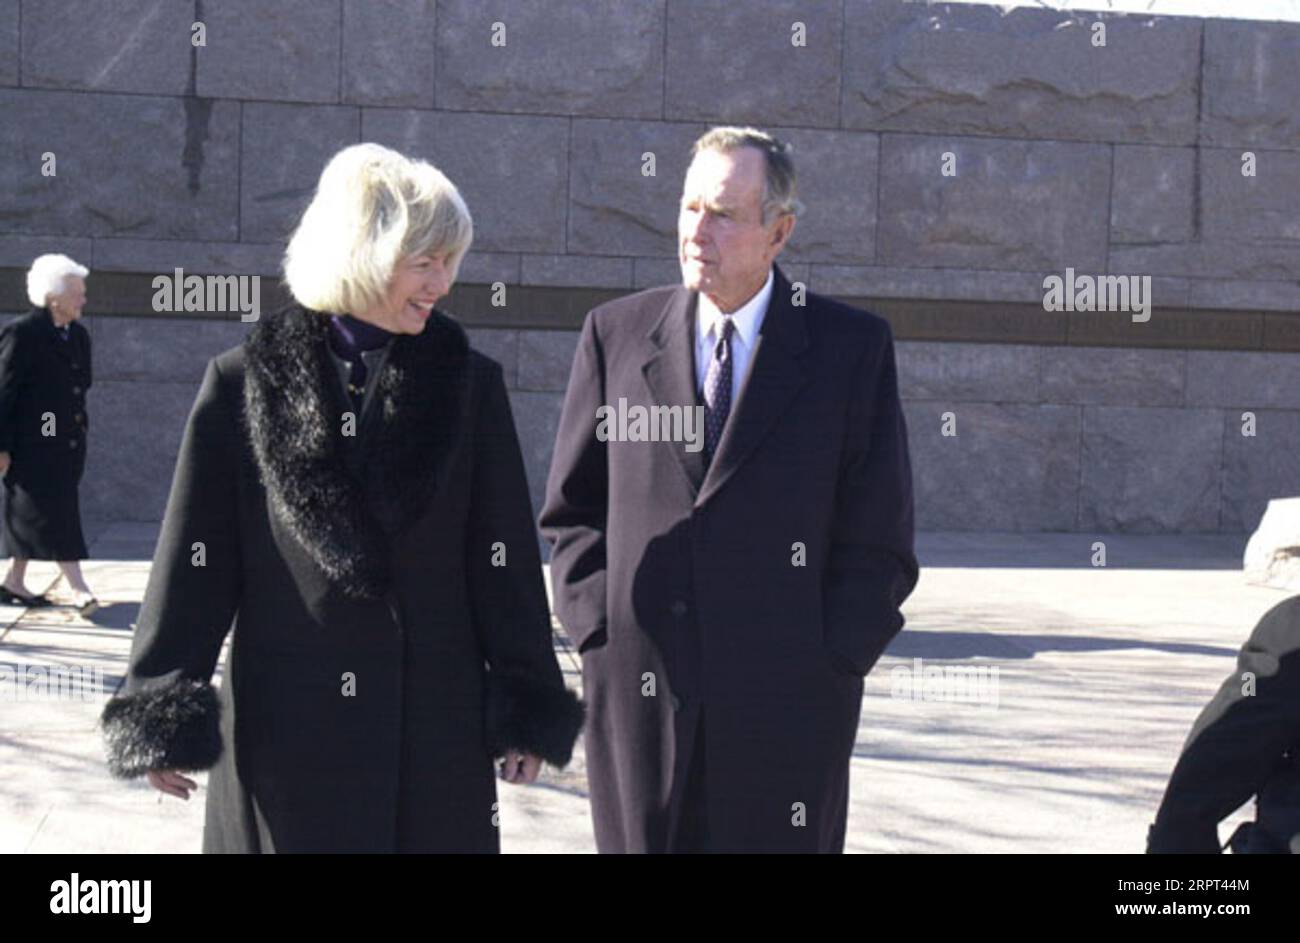 Secretary Gale Norton, left, with former President George H.W. Bush after inspecting statue of Franklin Delano Roosevelt in wheelchair, during visit to the Franklin Delano Roosevelt Memorial, Washington, D.C., for ceremonial unveiling of dedication panel for the statue Stock Photo